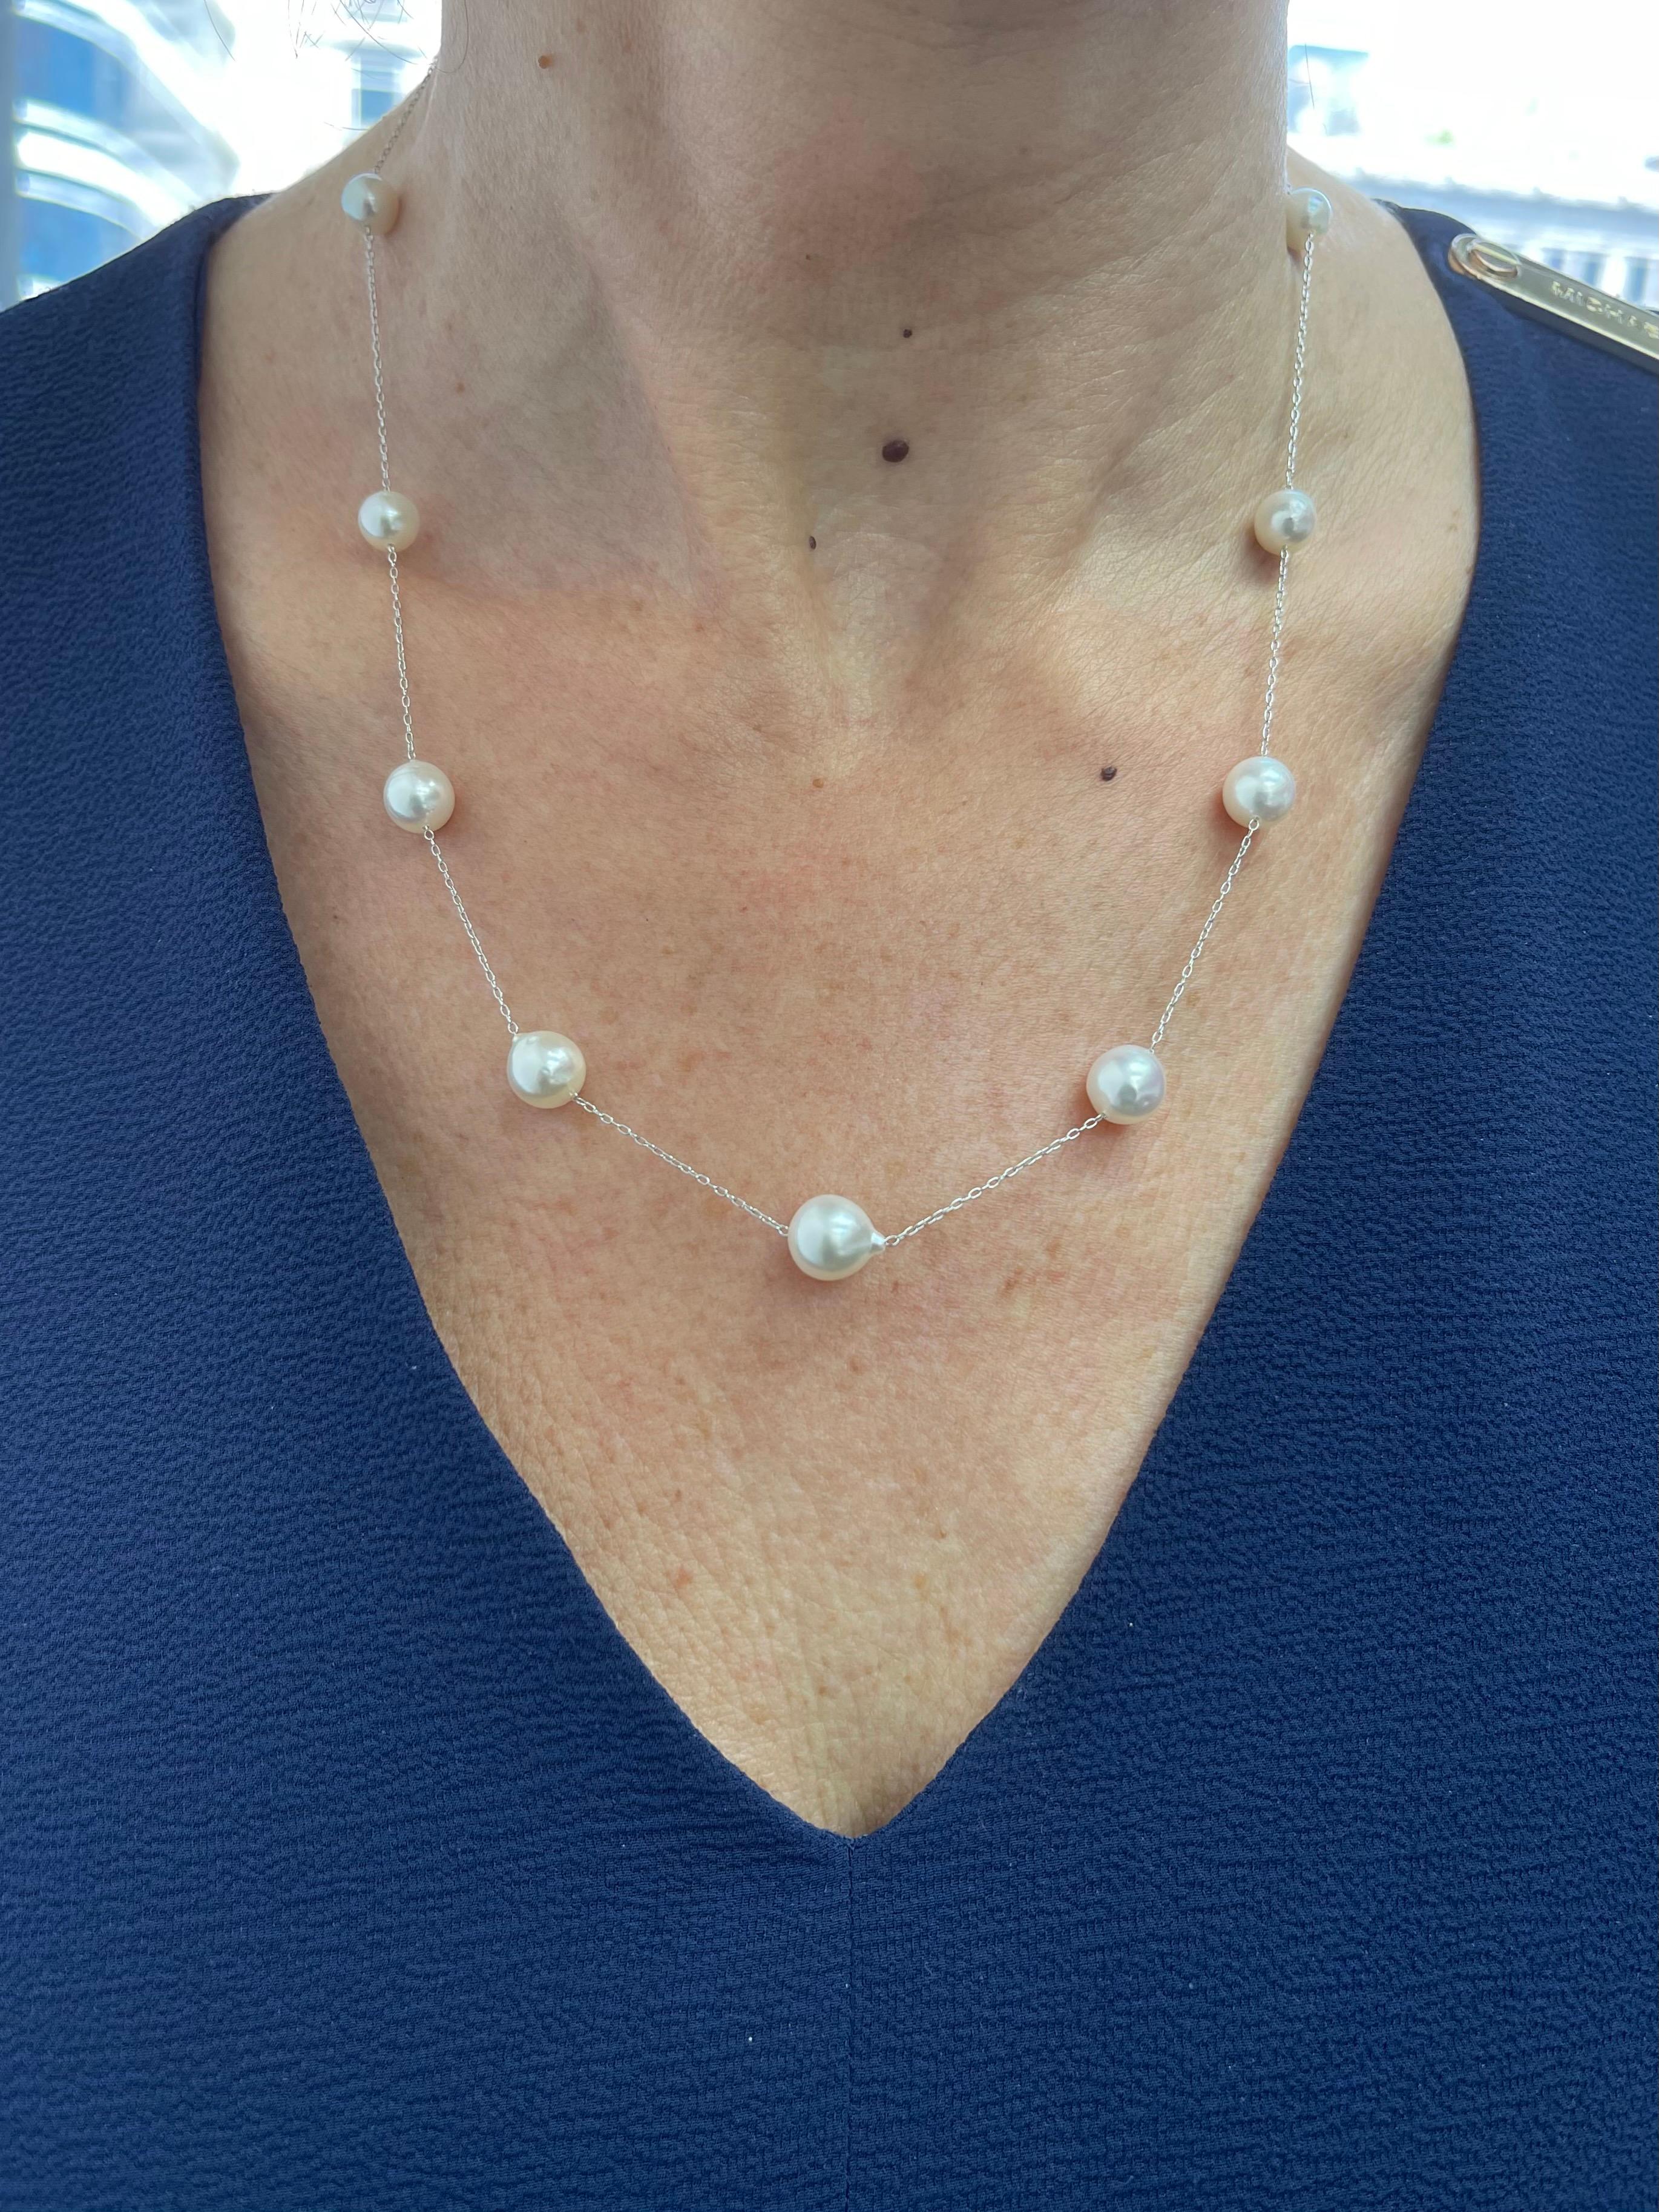 Uncut Cultured Akoya Baroque Pearl and Sterling Silver Necklace or Mask Chain For Sale